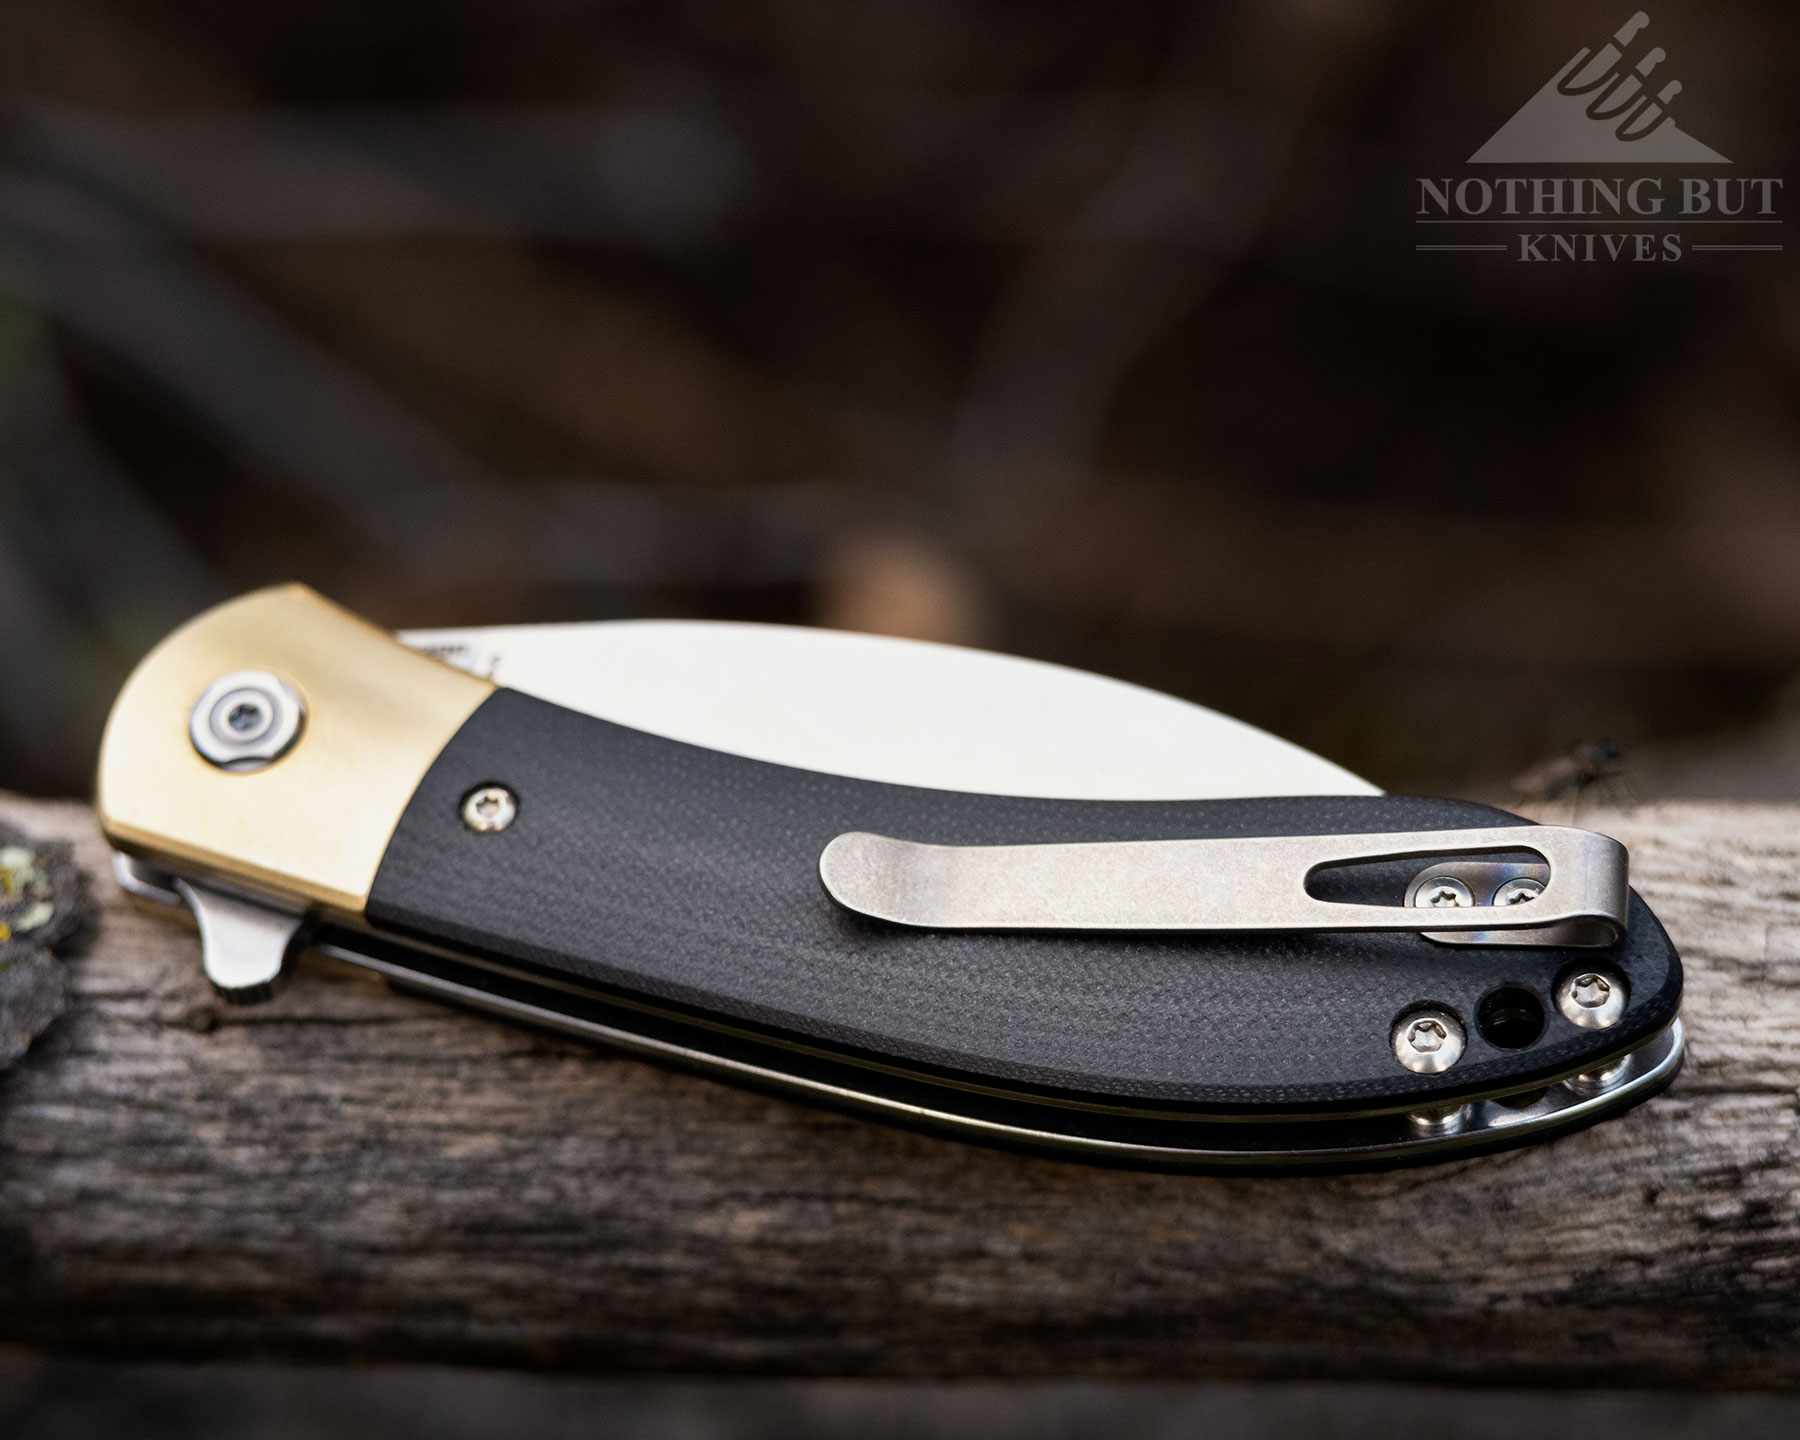 The Vosteed Nightshade folding knife in the closed position. 